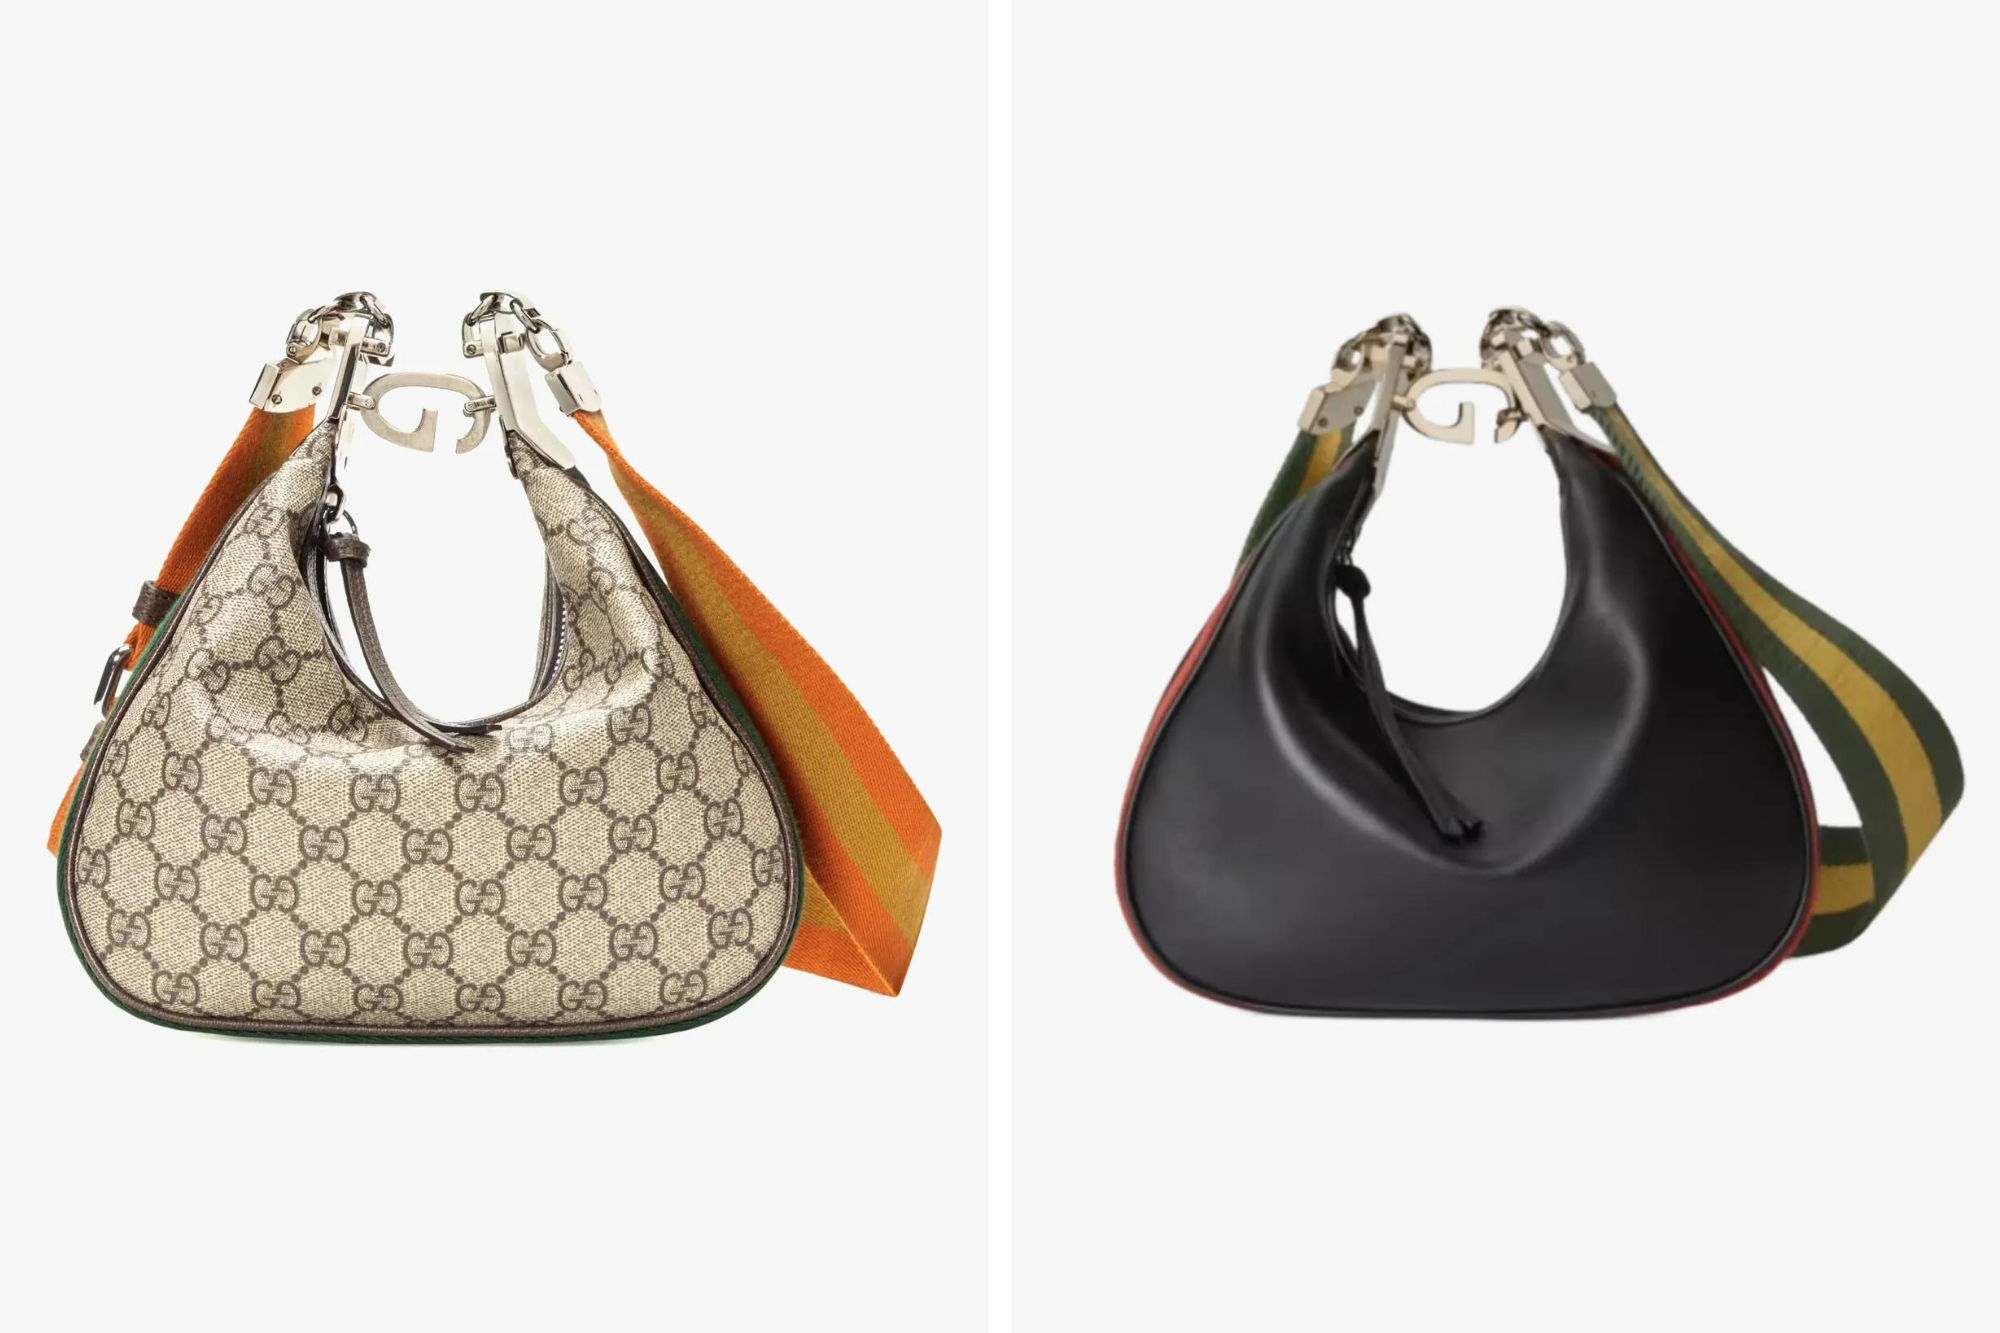 Resale value of Gucci, Chanel, Louis Vuitton handbags is falling